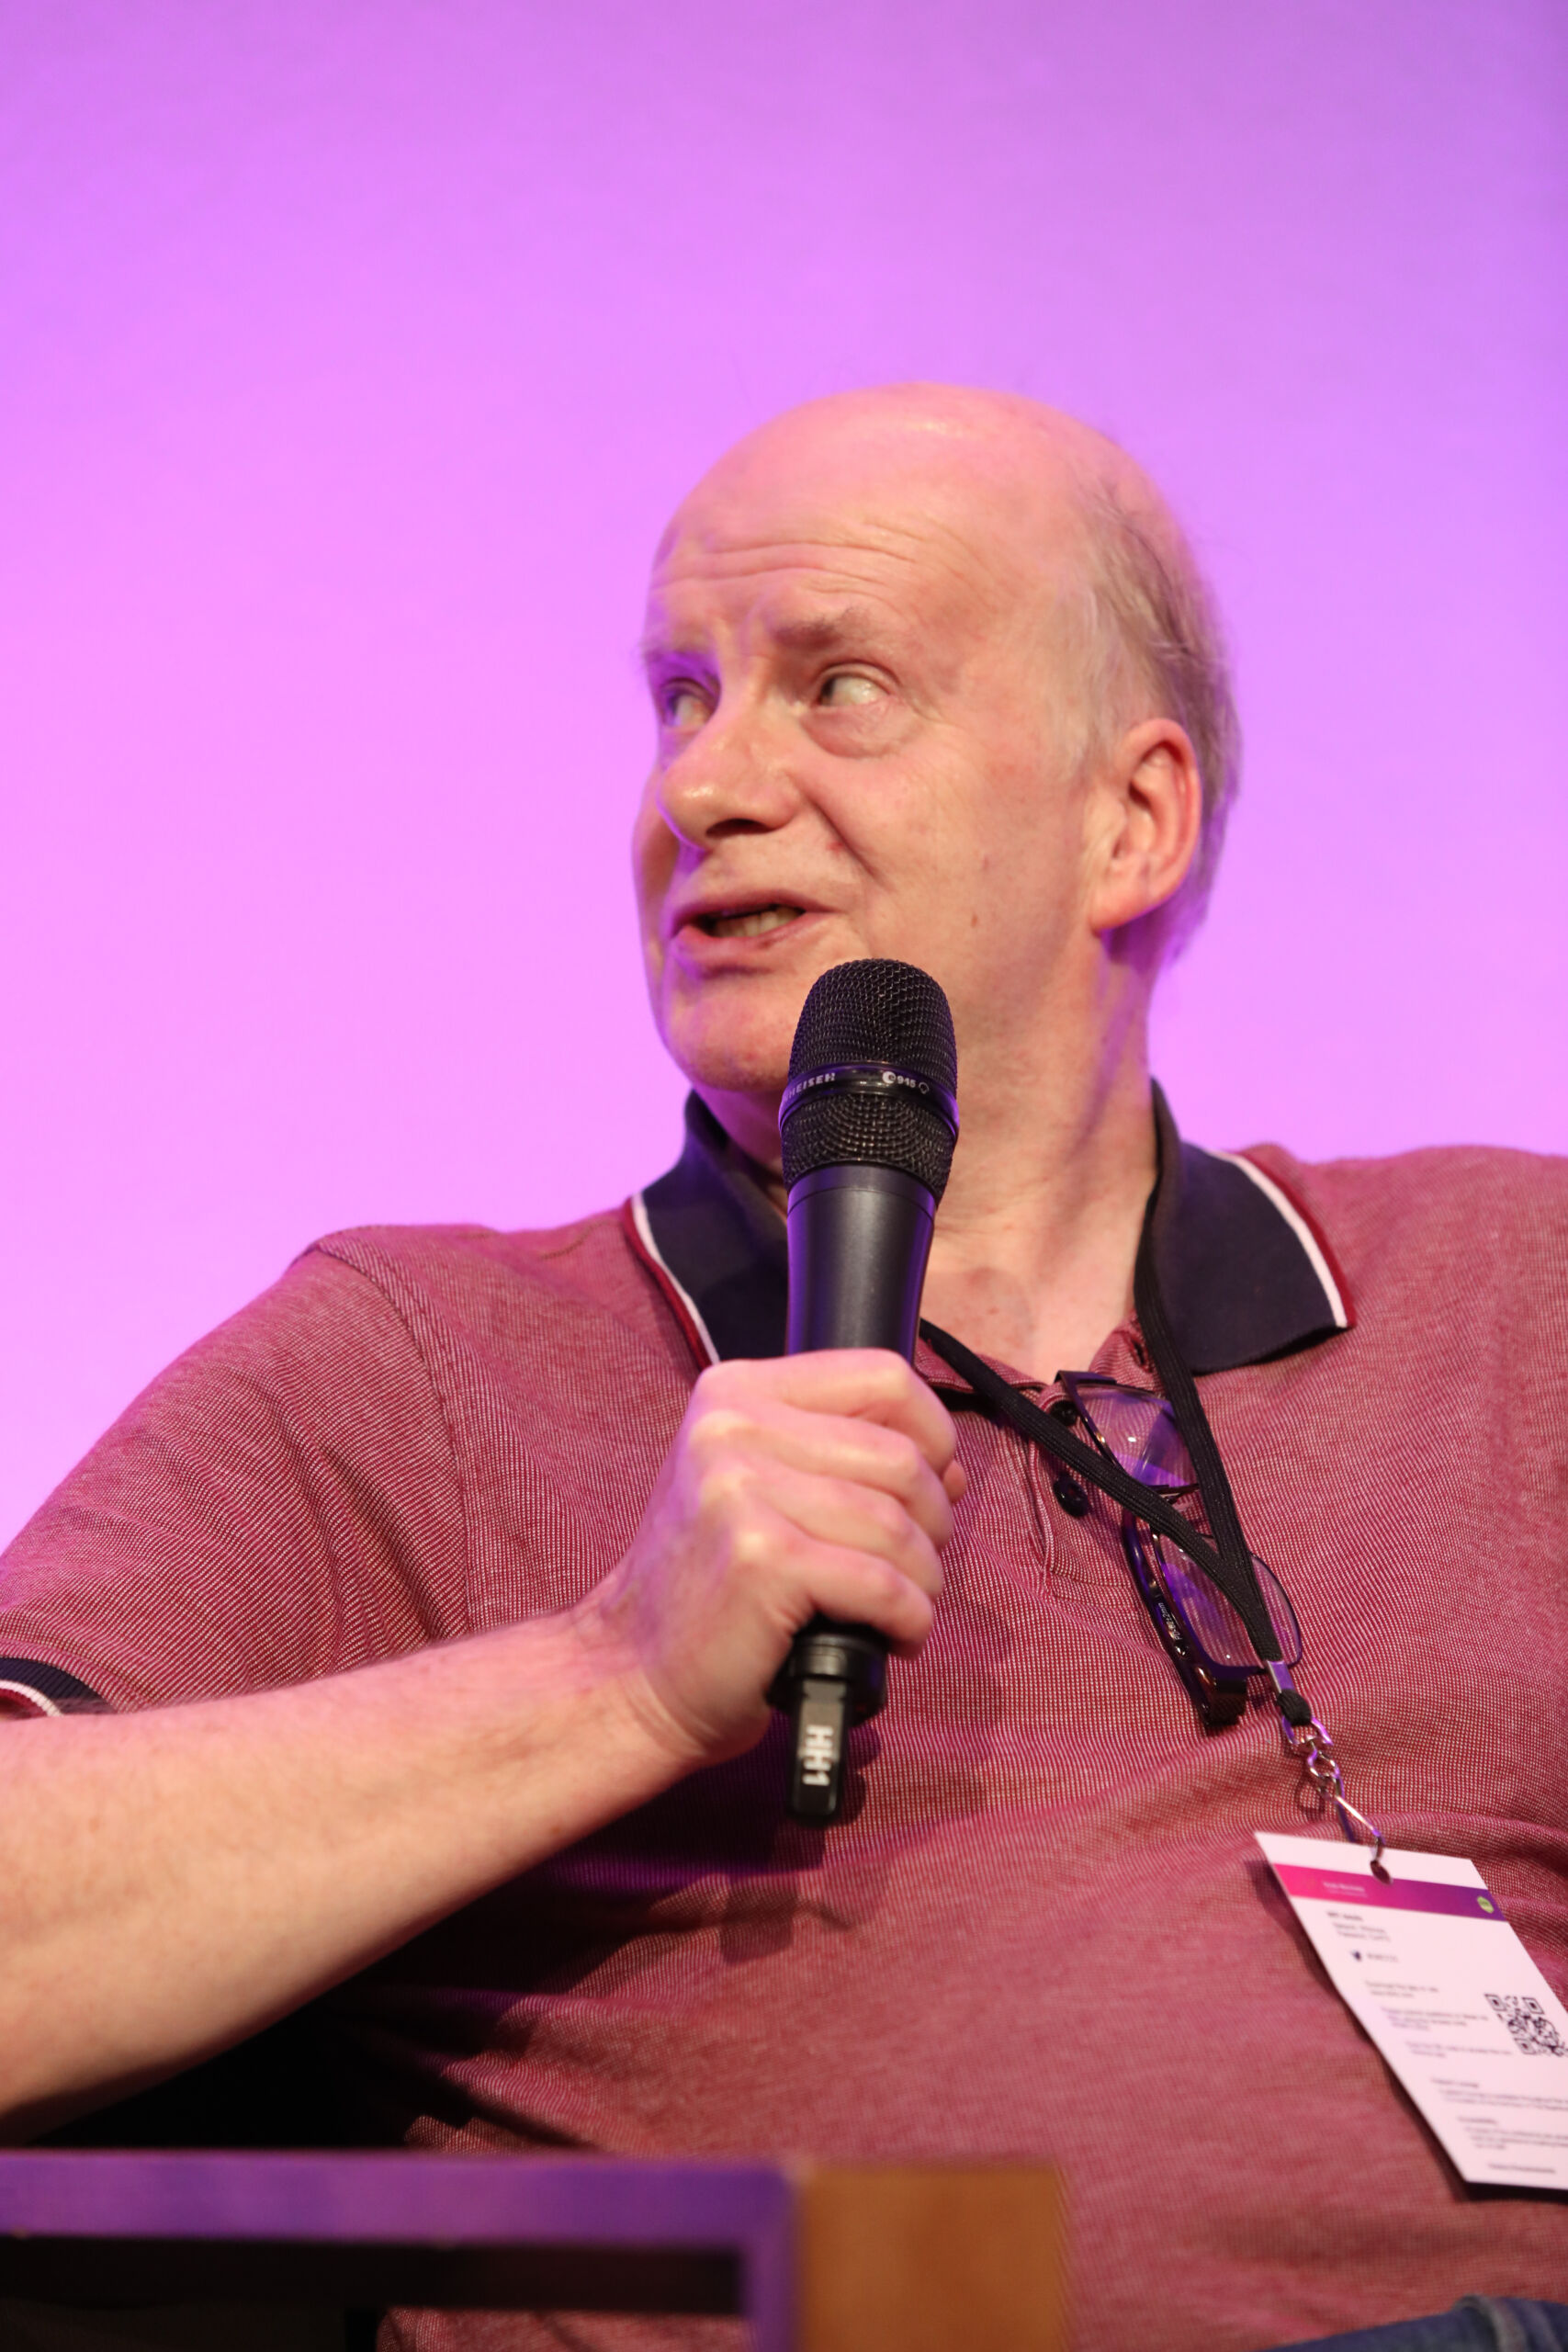 A white man in a red shirt sitting down holding a microphone